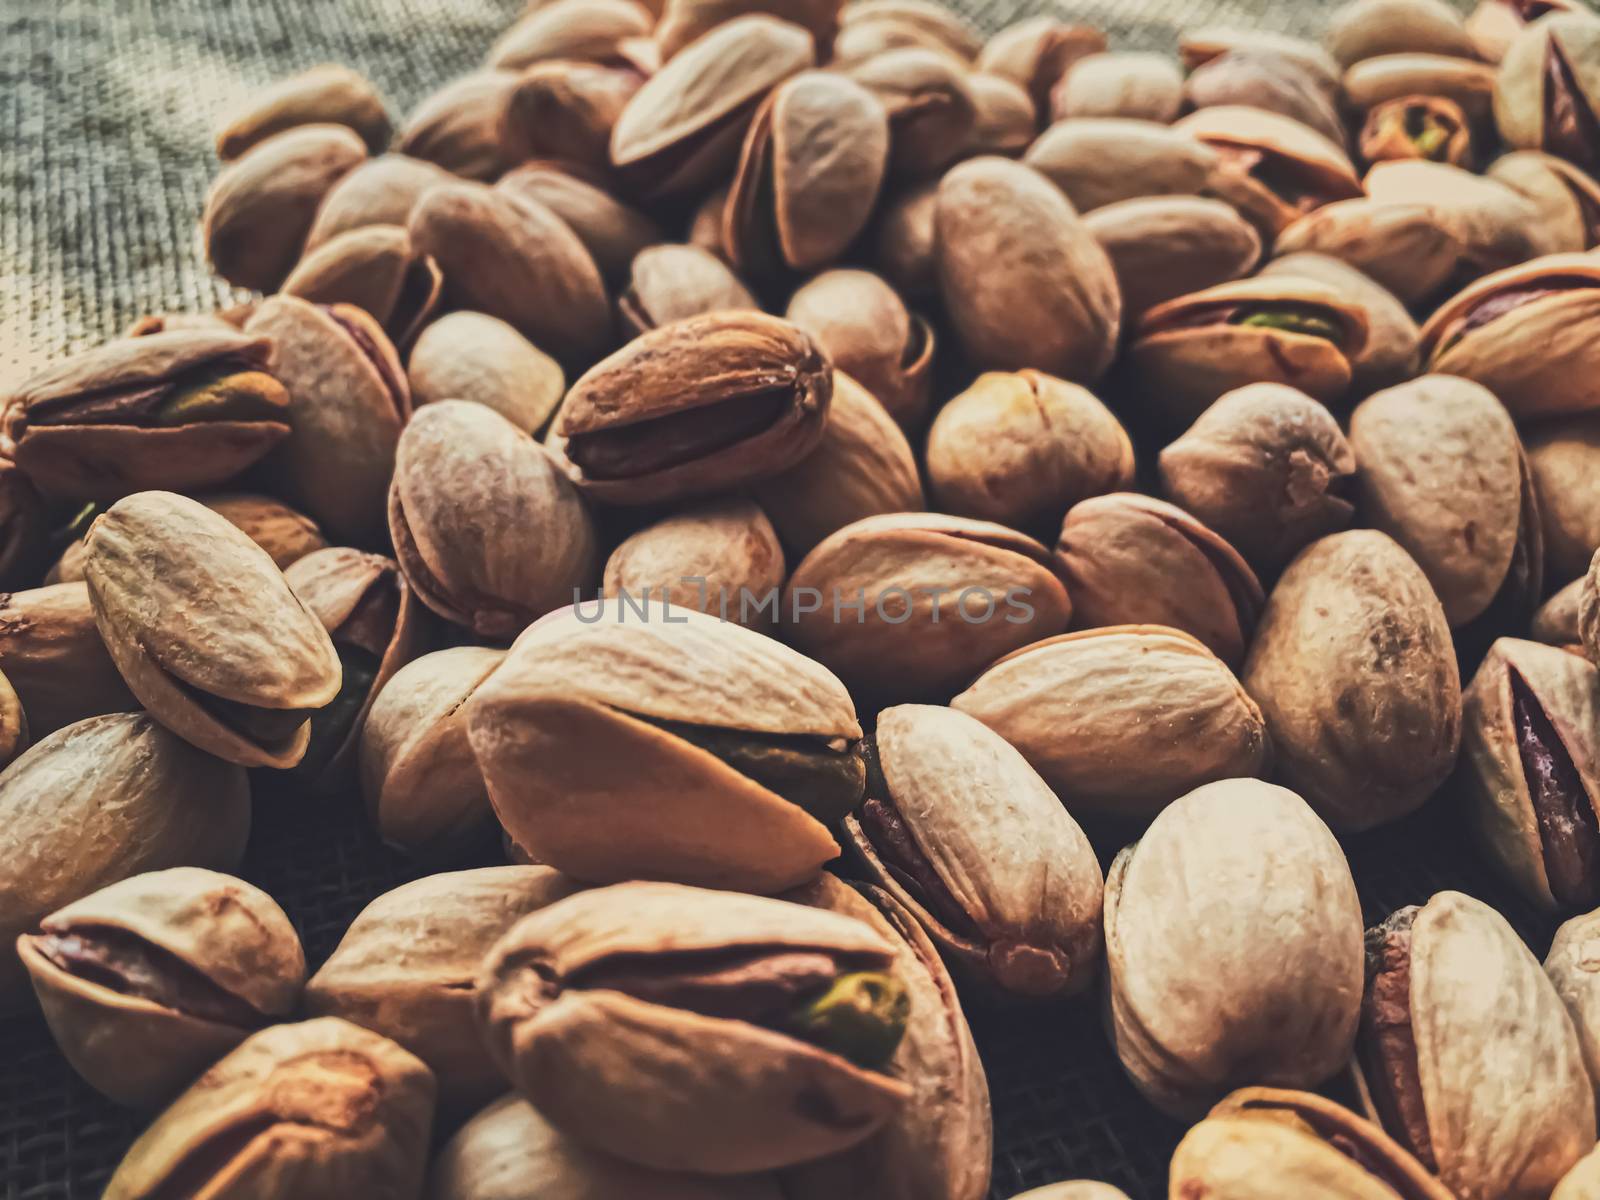 Pistachio nuts on rustic linen background, food and nutrition